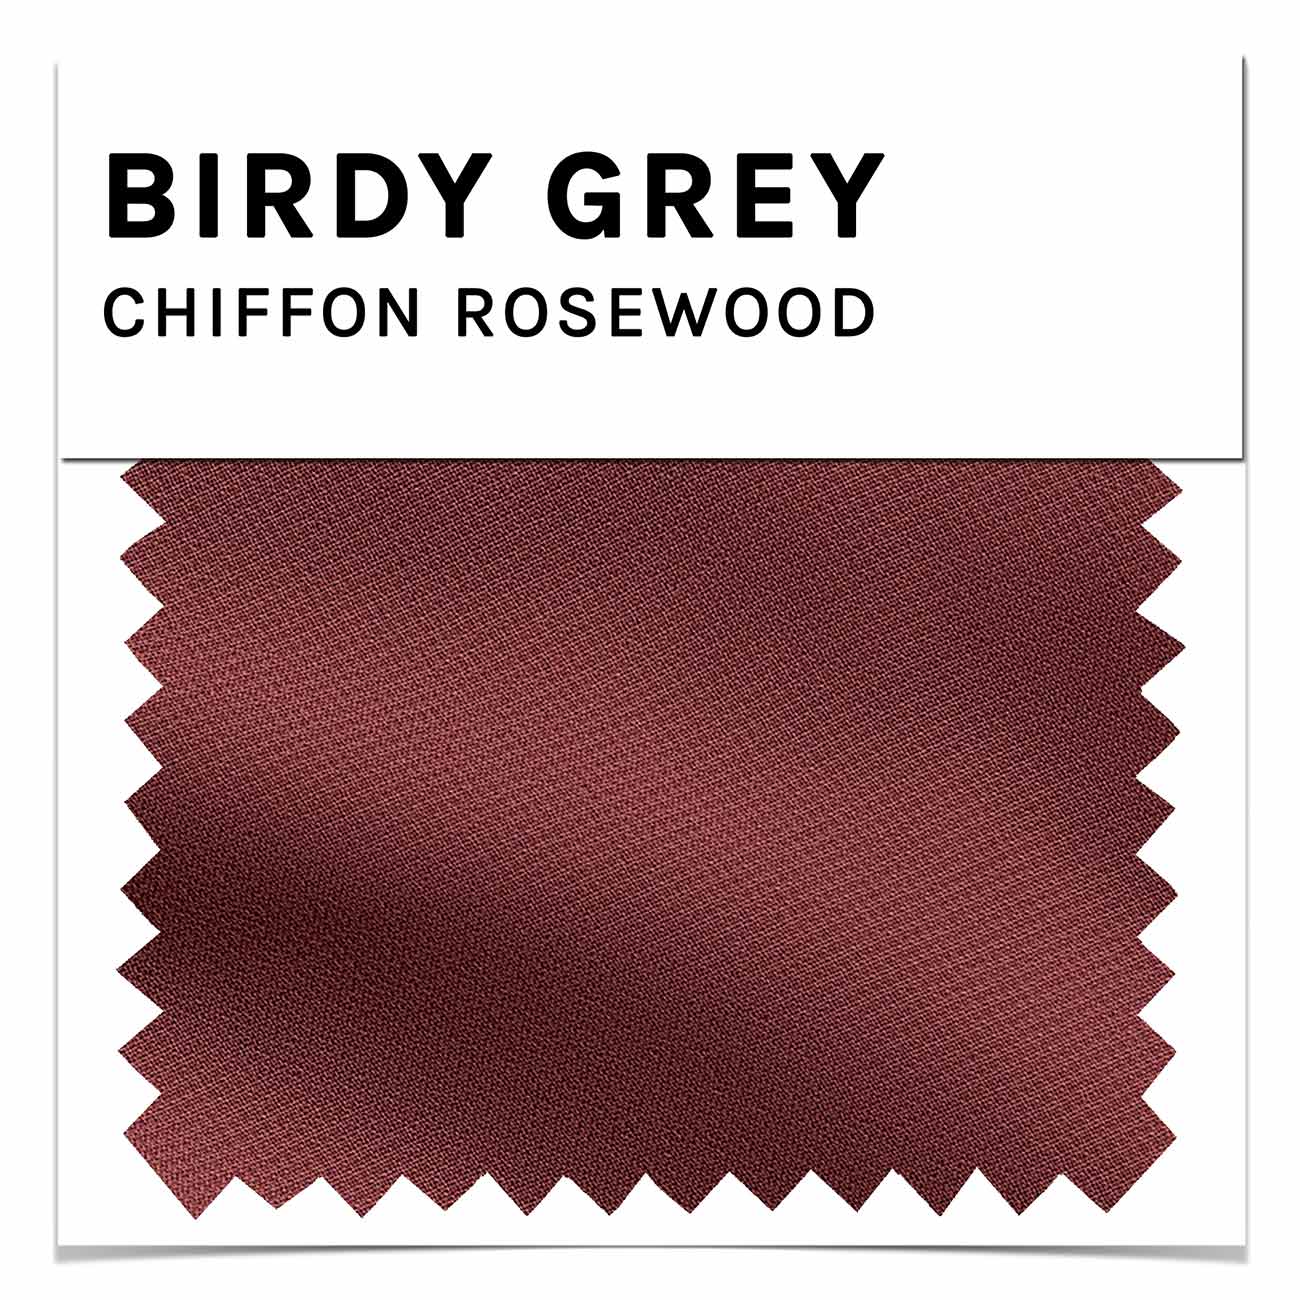 Swatch - Chiffon in Rosewood